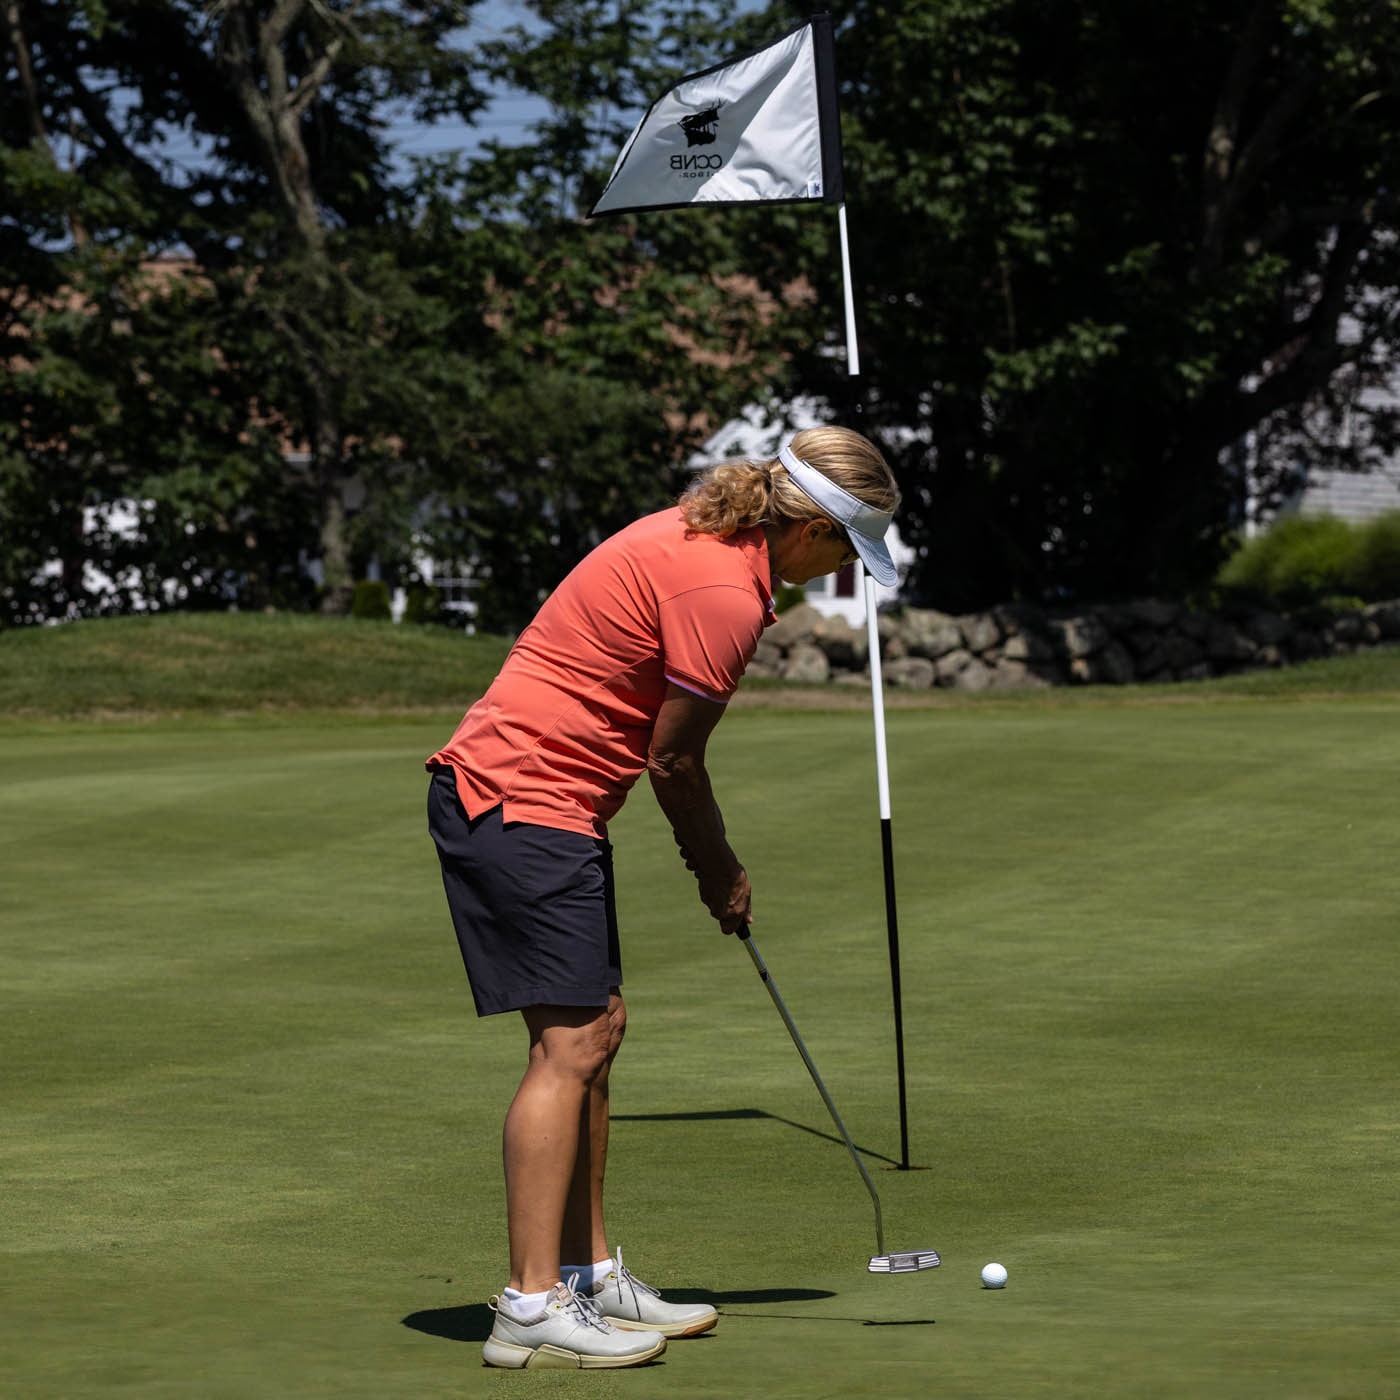 Country-Club-Of-New-Bedford FB-2023-Womens-FB-Gallery August-2023-Country-Club-Of-New-Bedford-FB-2023-Womens-FB-Gallery August-2023-Womens-FB-Gallery-Tuesday-Photos-Image-39